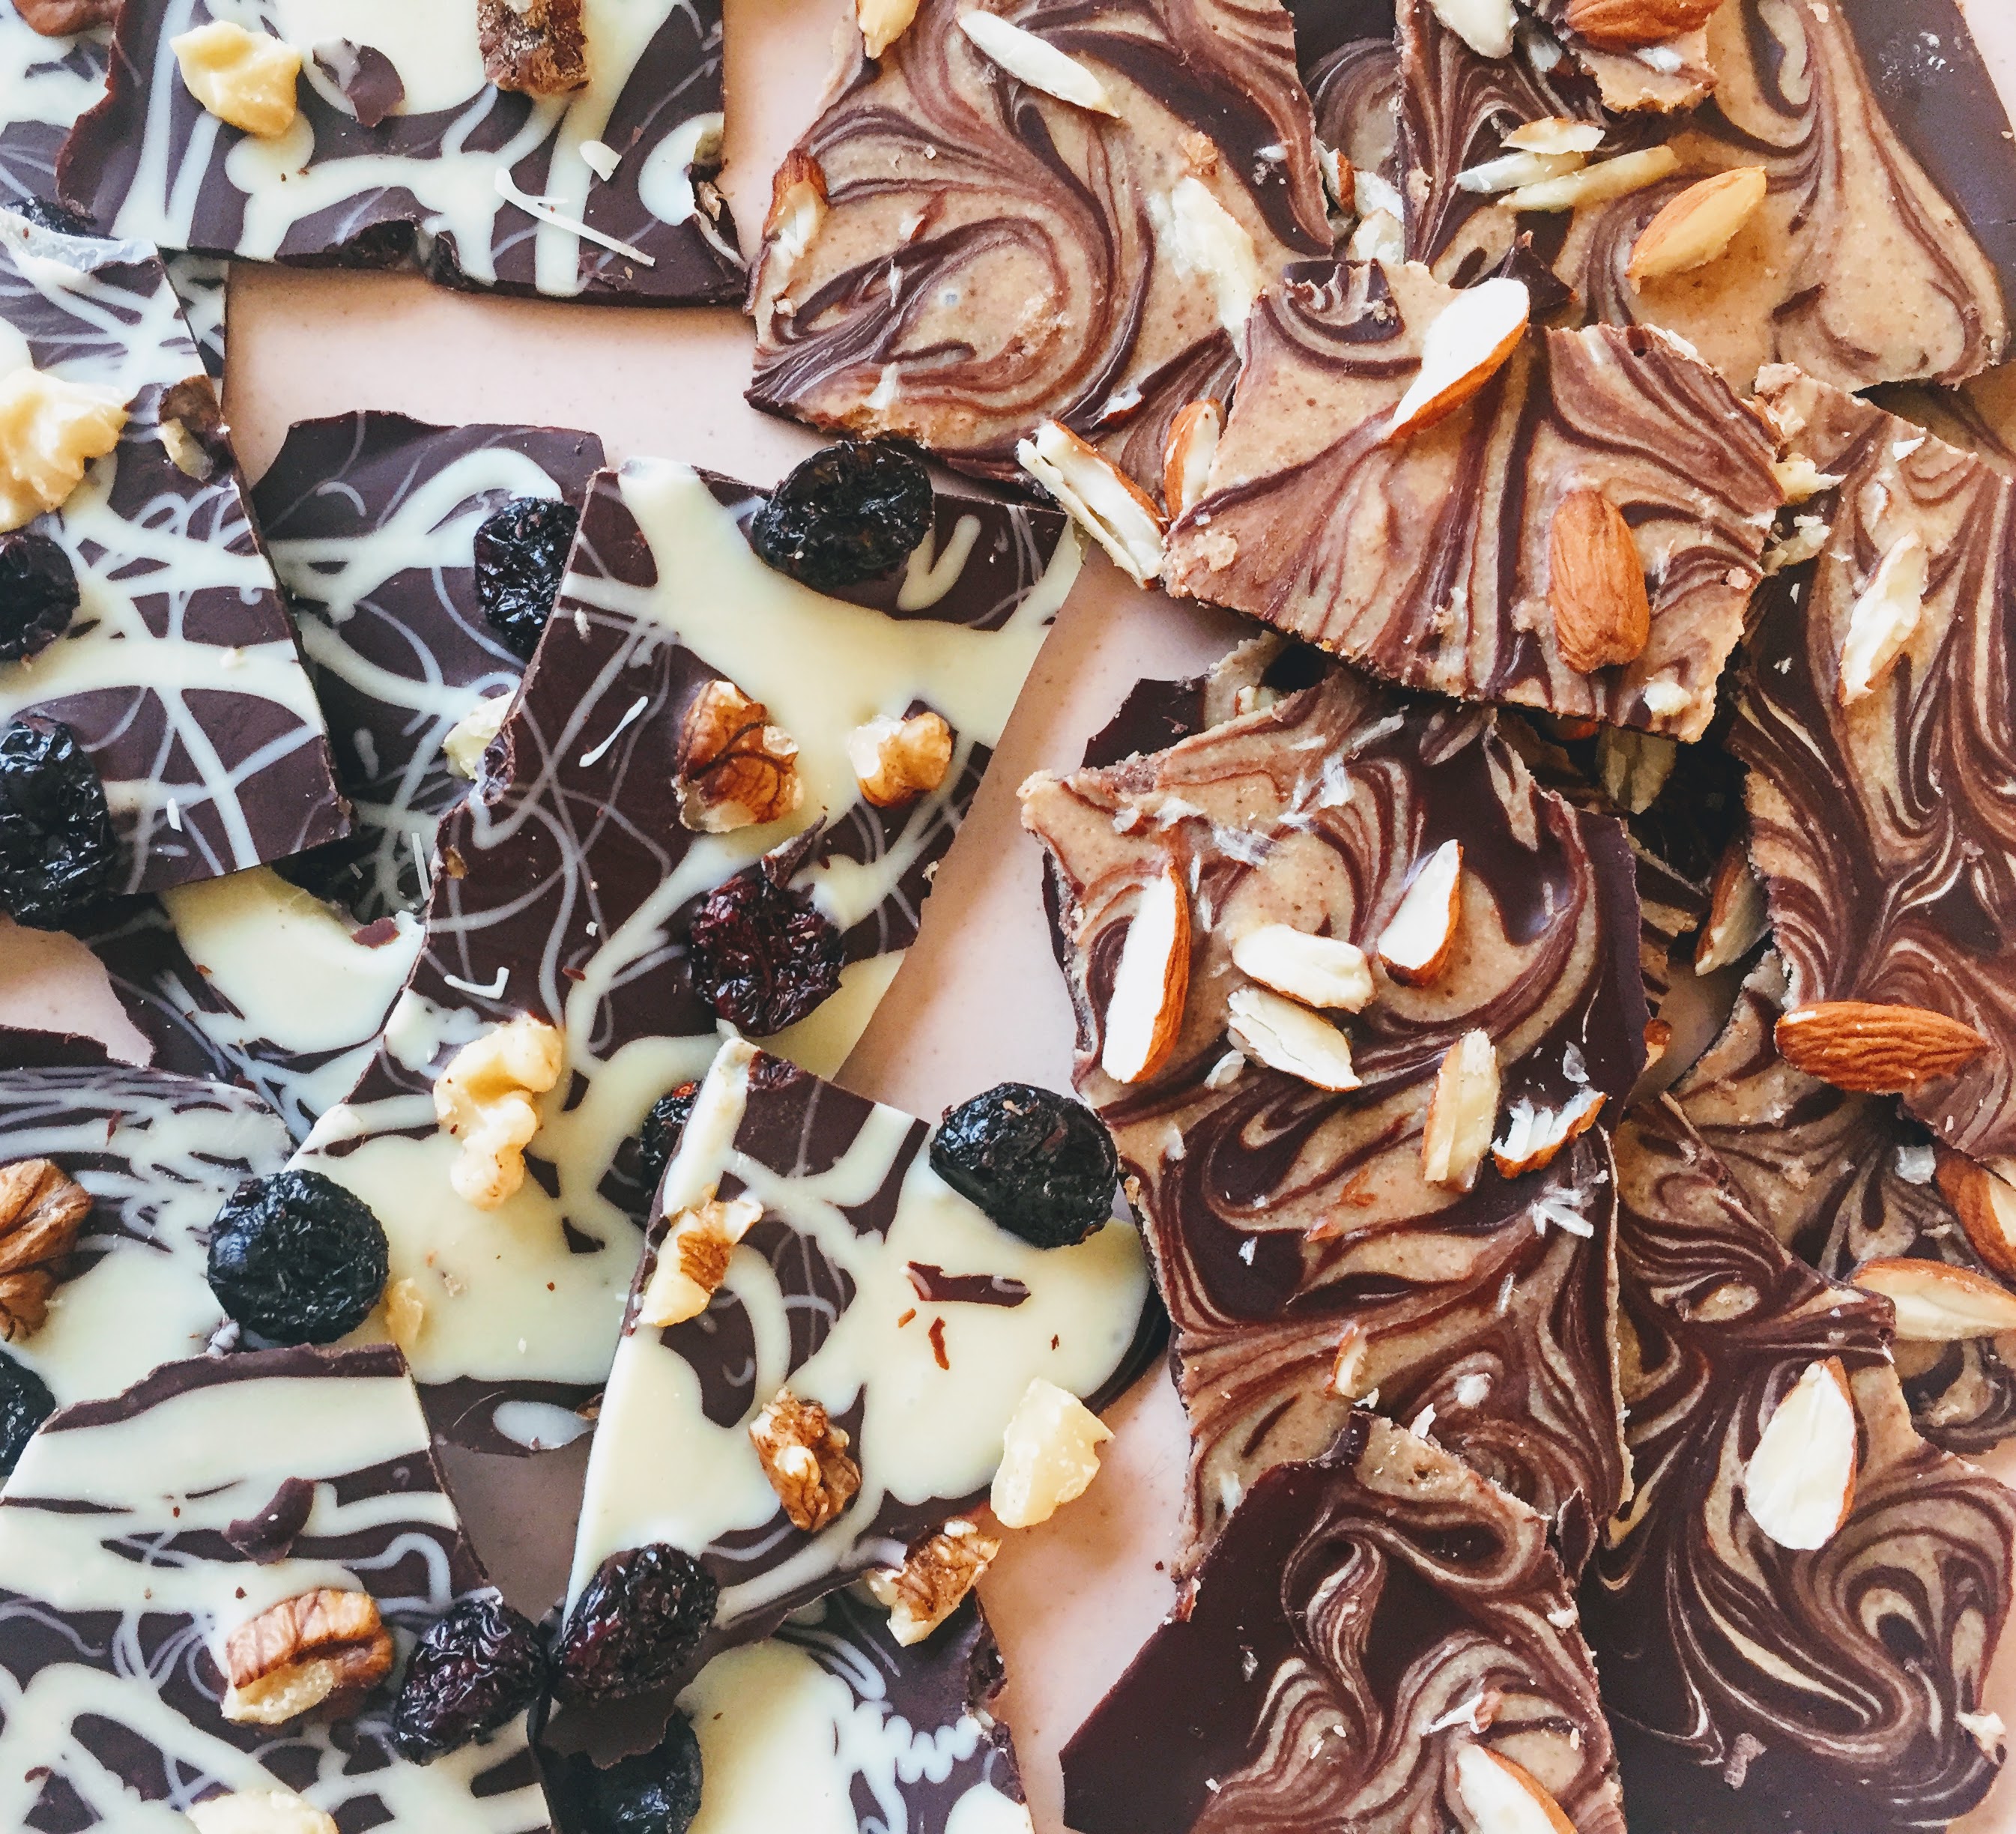 Shards of chocolate bark. On the left-hand side are thin pieces of dark chocolate melded with white chocolate and covered in dried cranberries and chopped walnuts. On the right hand side are thin pieces of dark chocolate marbled with almond butter, with slivered almonds. The pieces are broken and irregular and arranged on a light pink background. 